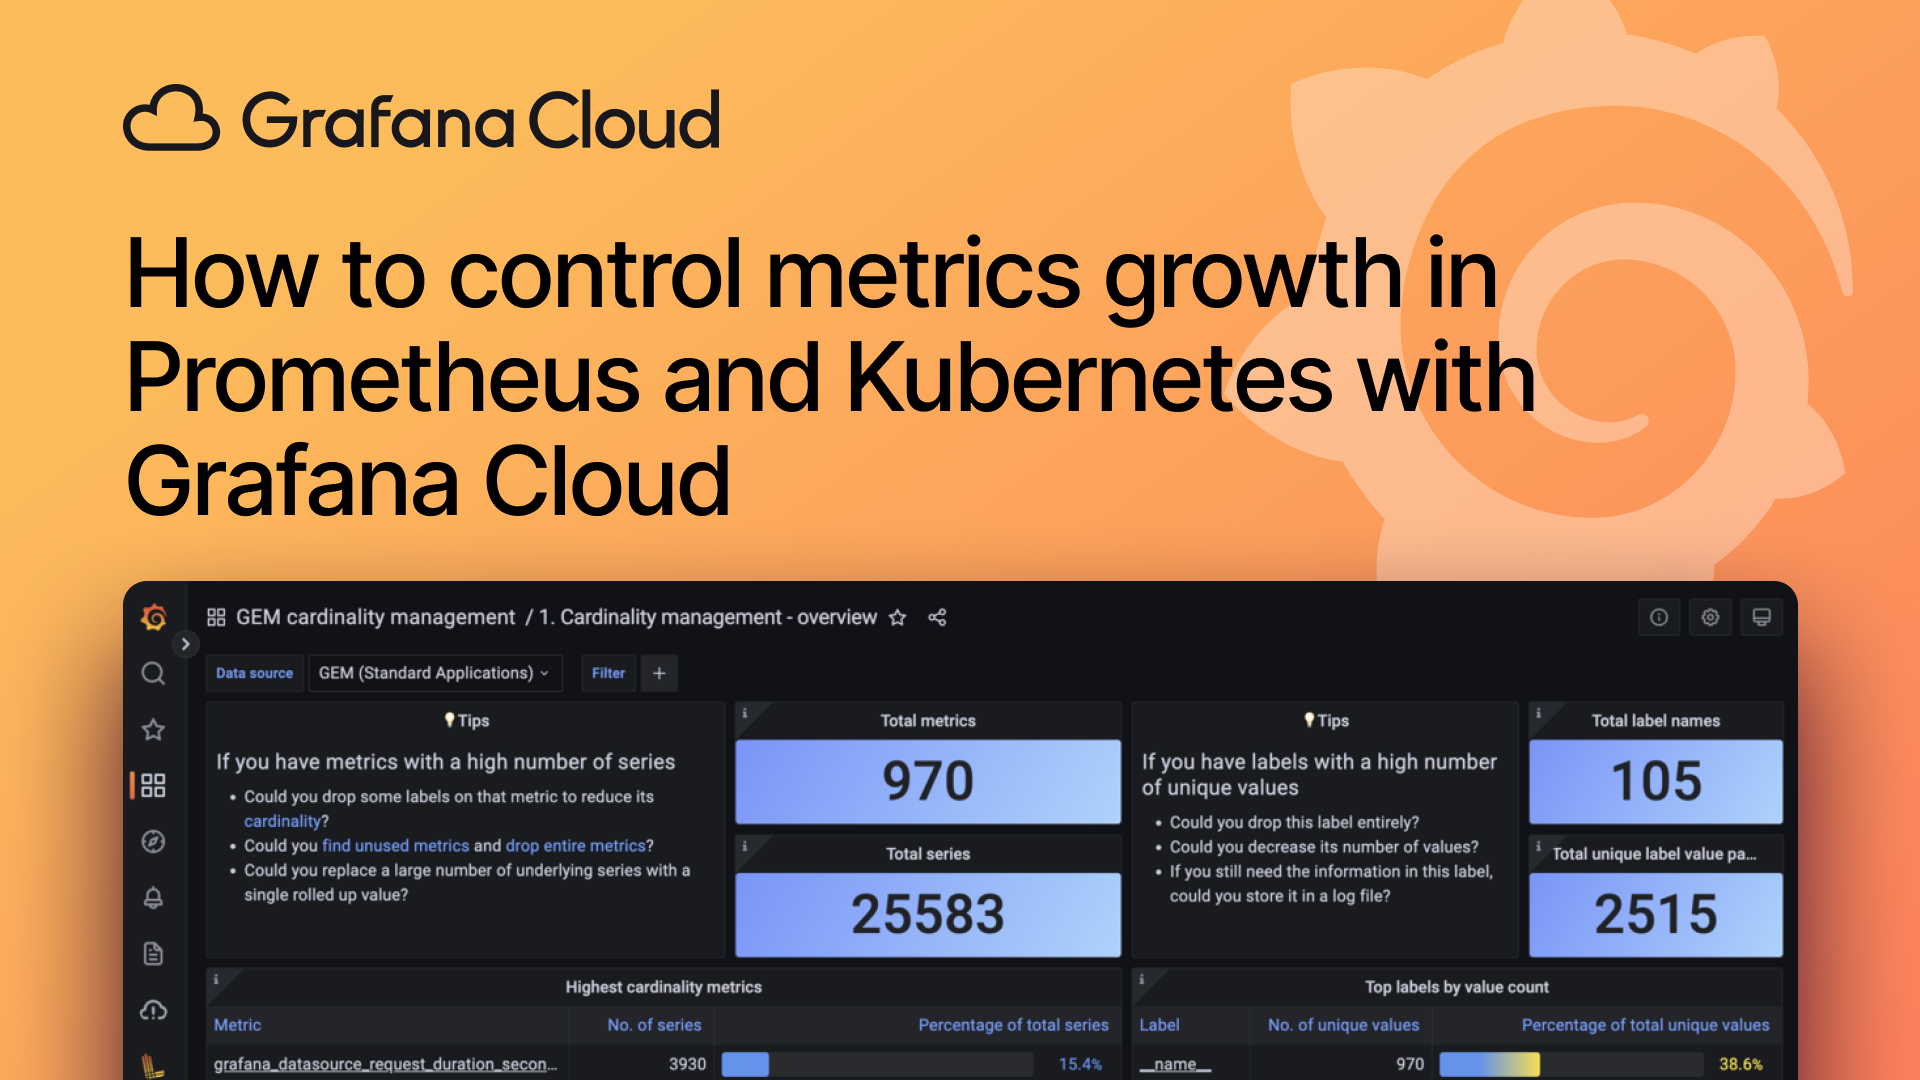 How to control metrics growth in Prometheus and Kubernetes with Grafana Cloud